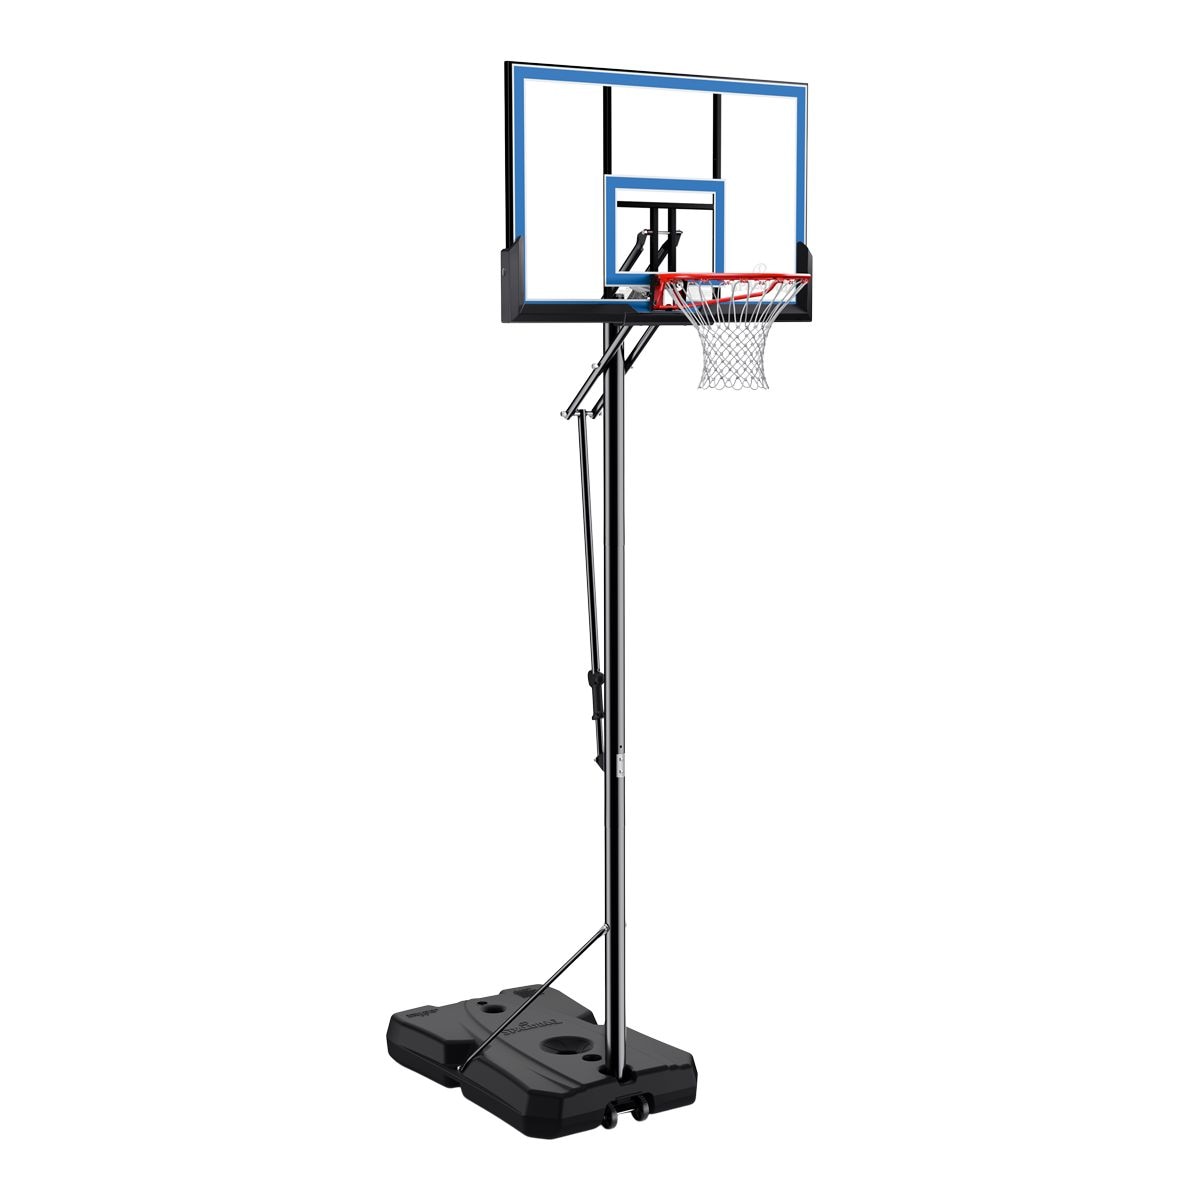 Image of Spalding 48 Inch Polycarbonate Portable Basketball System